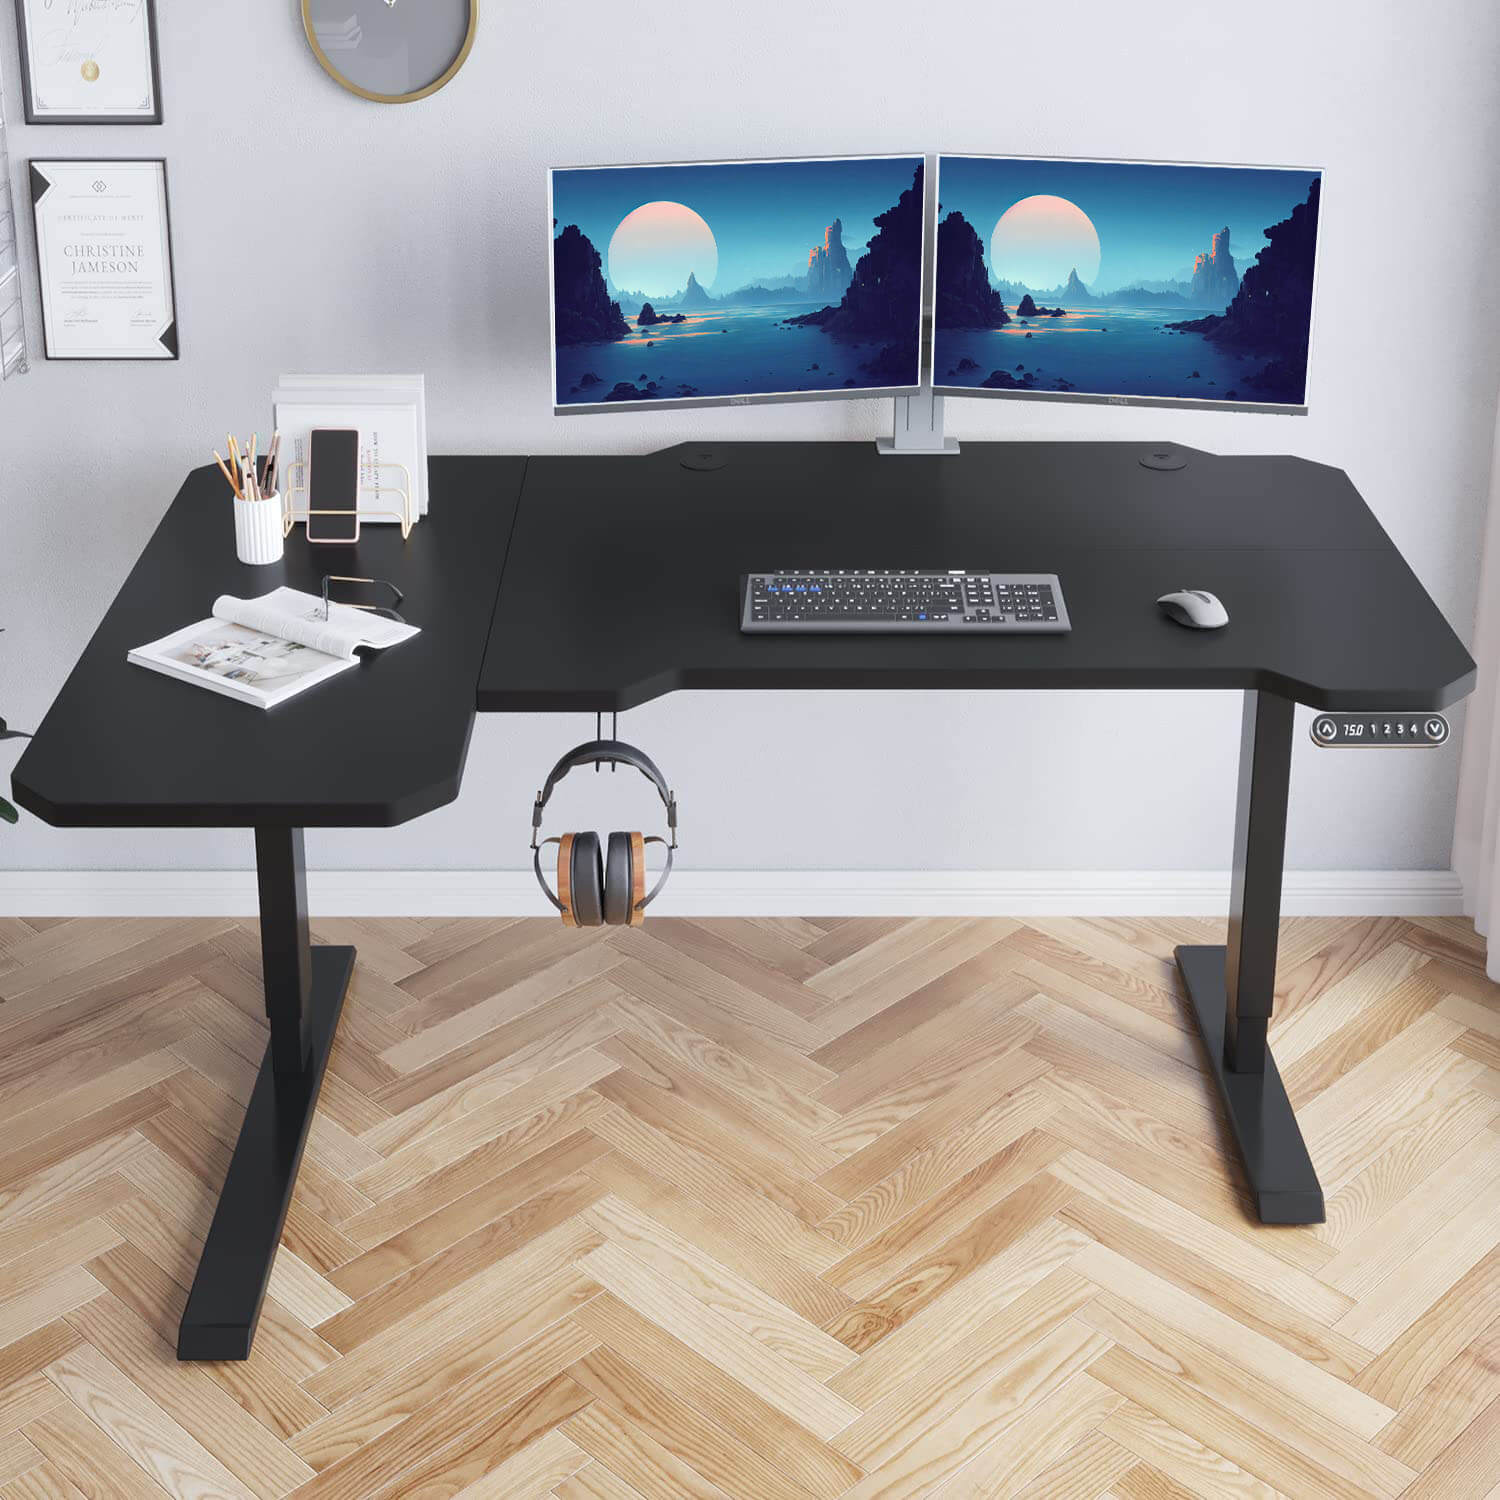 Deskohilo 59" x 24" Electric Height Adjustable Computer L-Shaped Office Desks with Memory Controller Corner Standing Desk with Splice Board